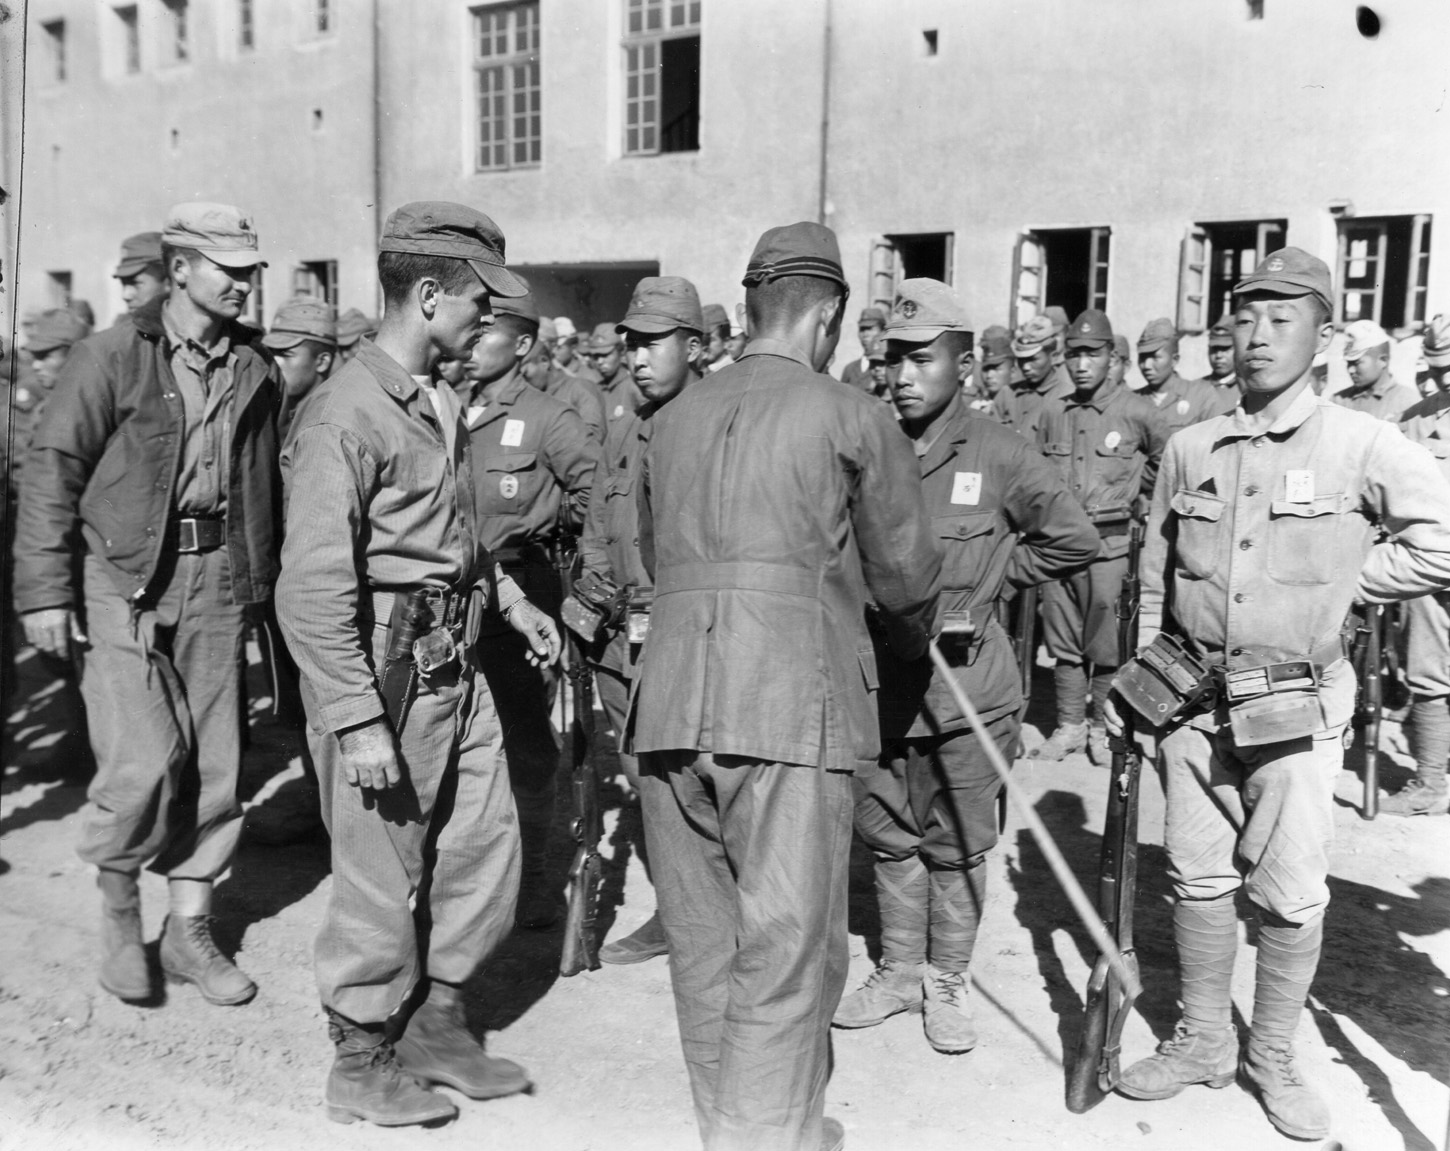 American officers of the 6th Marine Division inspect Japanese soldiers at Tsingtao airfield. As Japanese soldiers were repatriated from China after World War II ended, some remained to guard rail lines against sabotage or disruption caused by the reemergence of civil war in China.